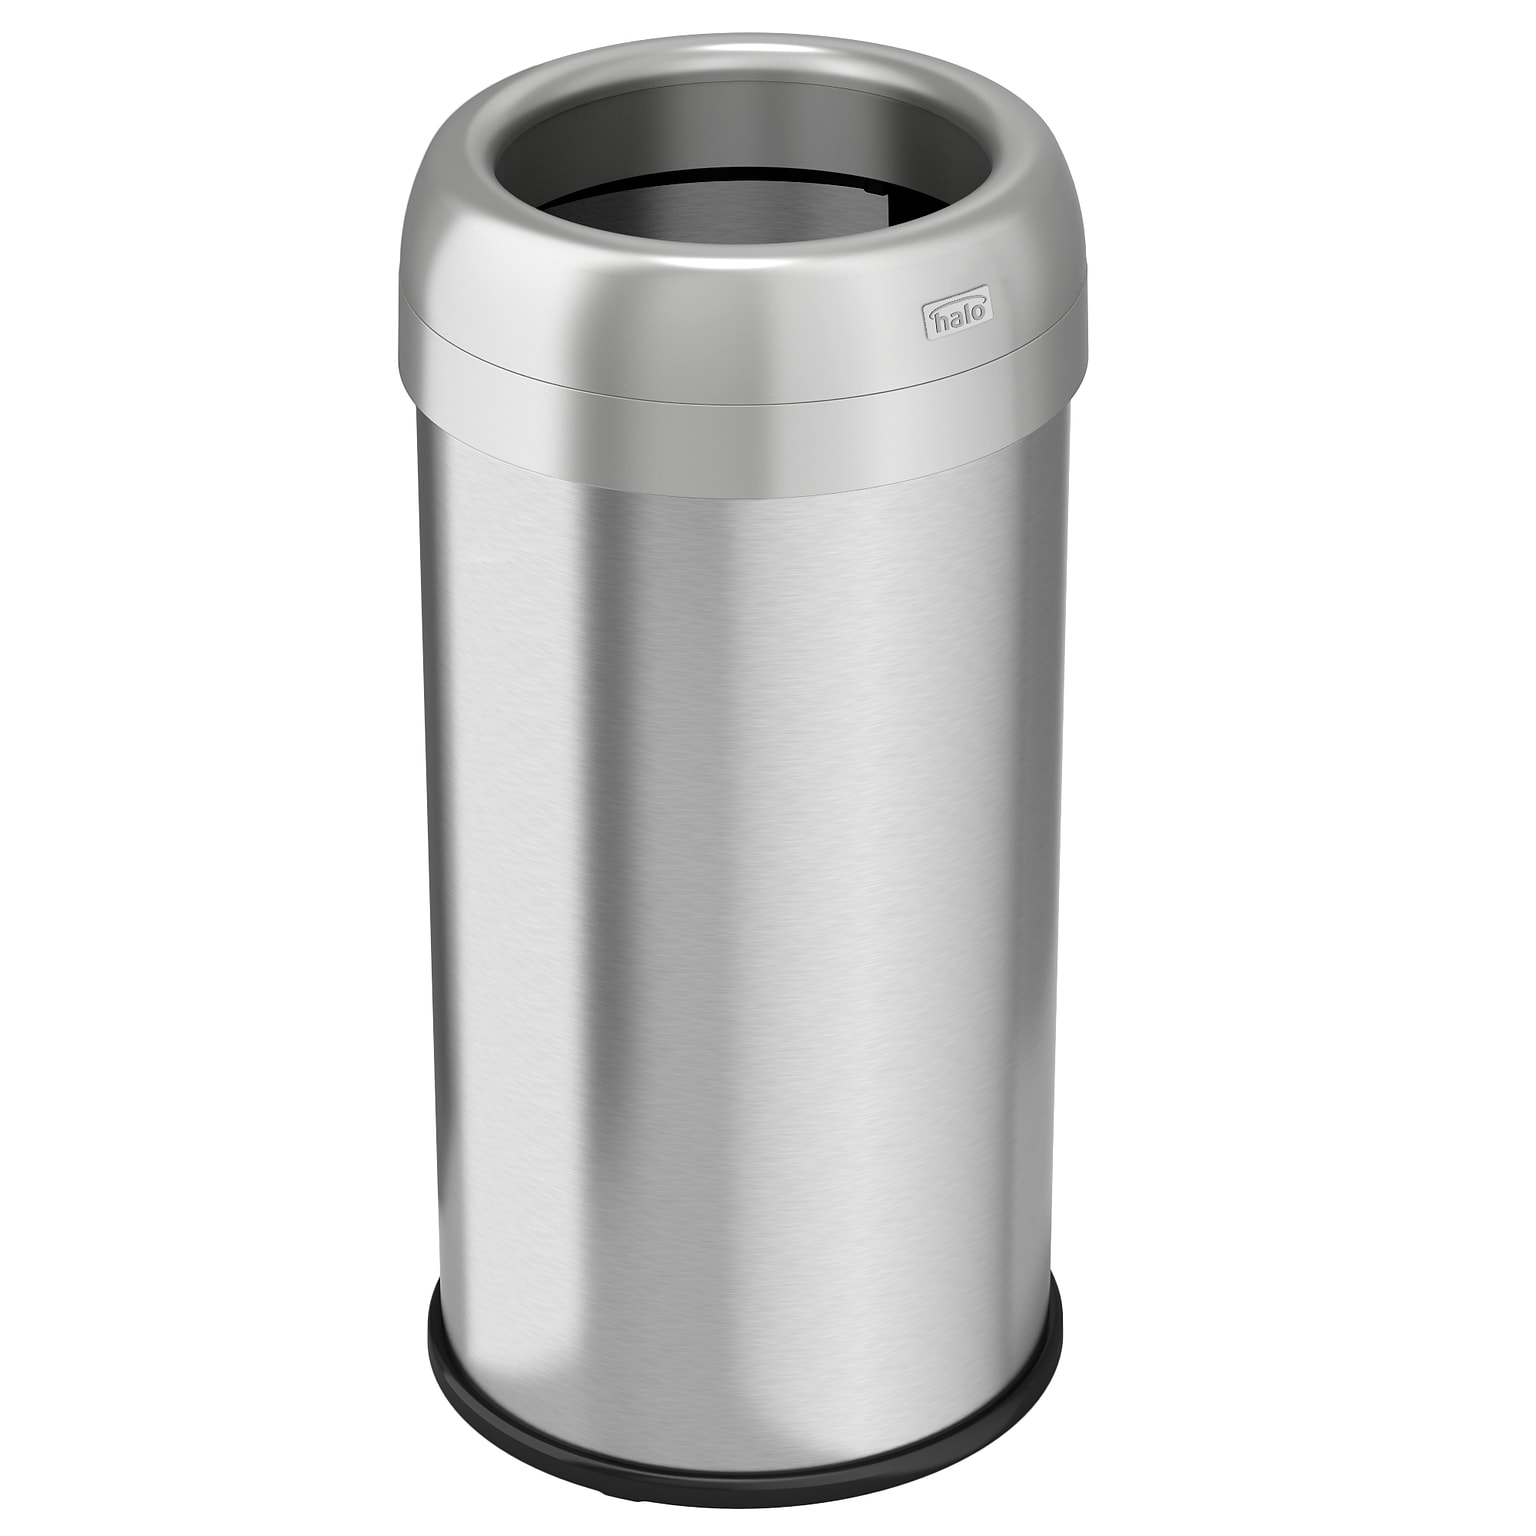 halo Stainless Steel Round Open Top Trash Can with Dual AbsorbX Odor Control System, Silver, 16 Gal. (OT16STR)